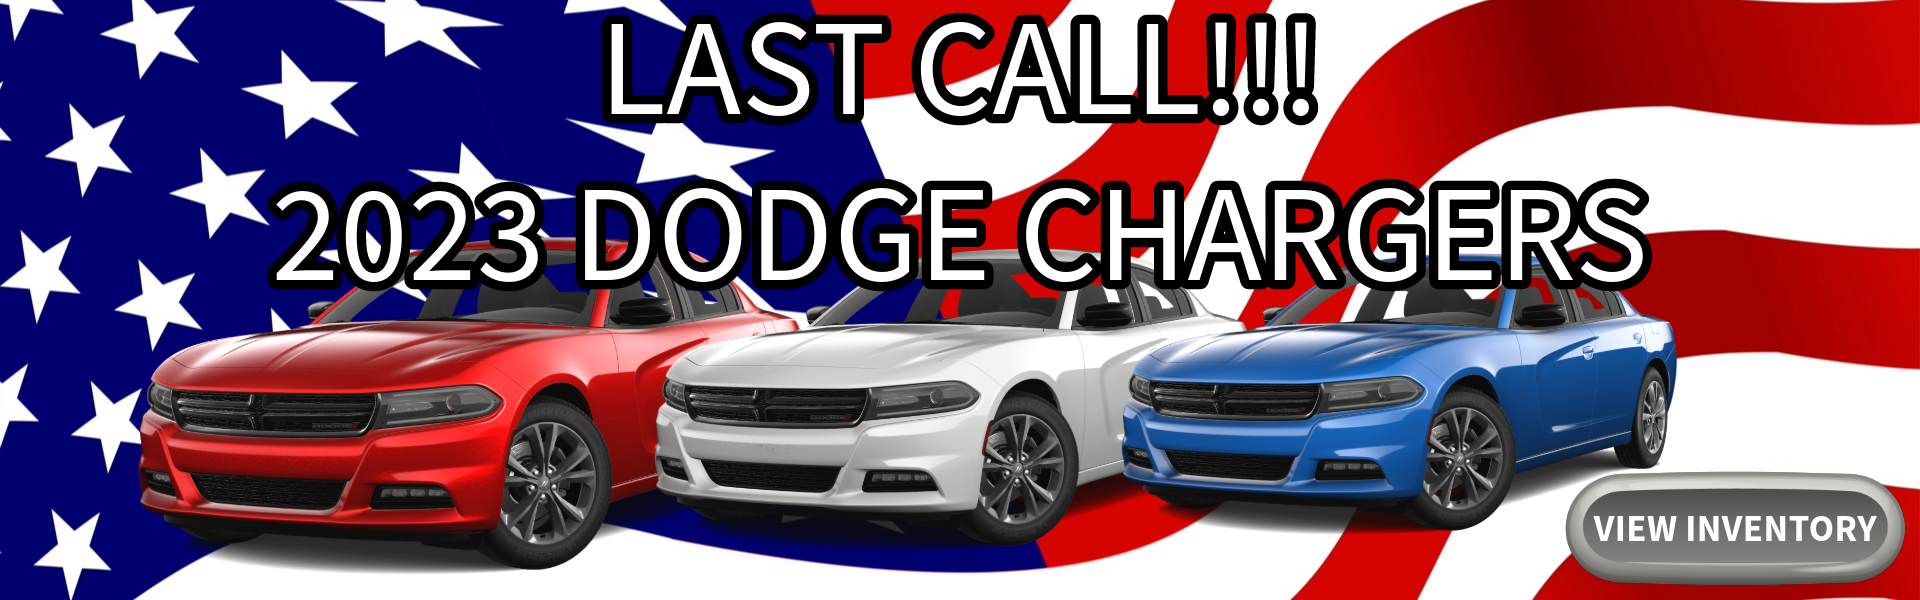 2023 Dodge Charger Closeout Last Call